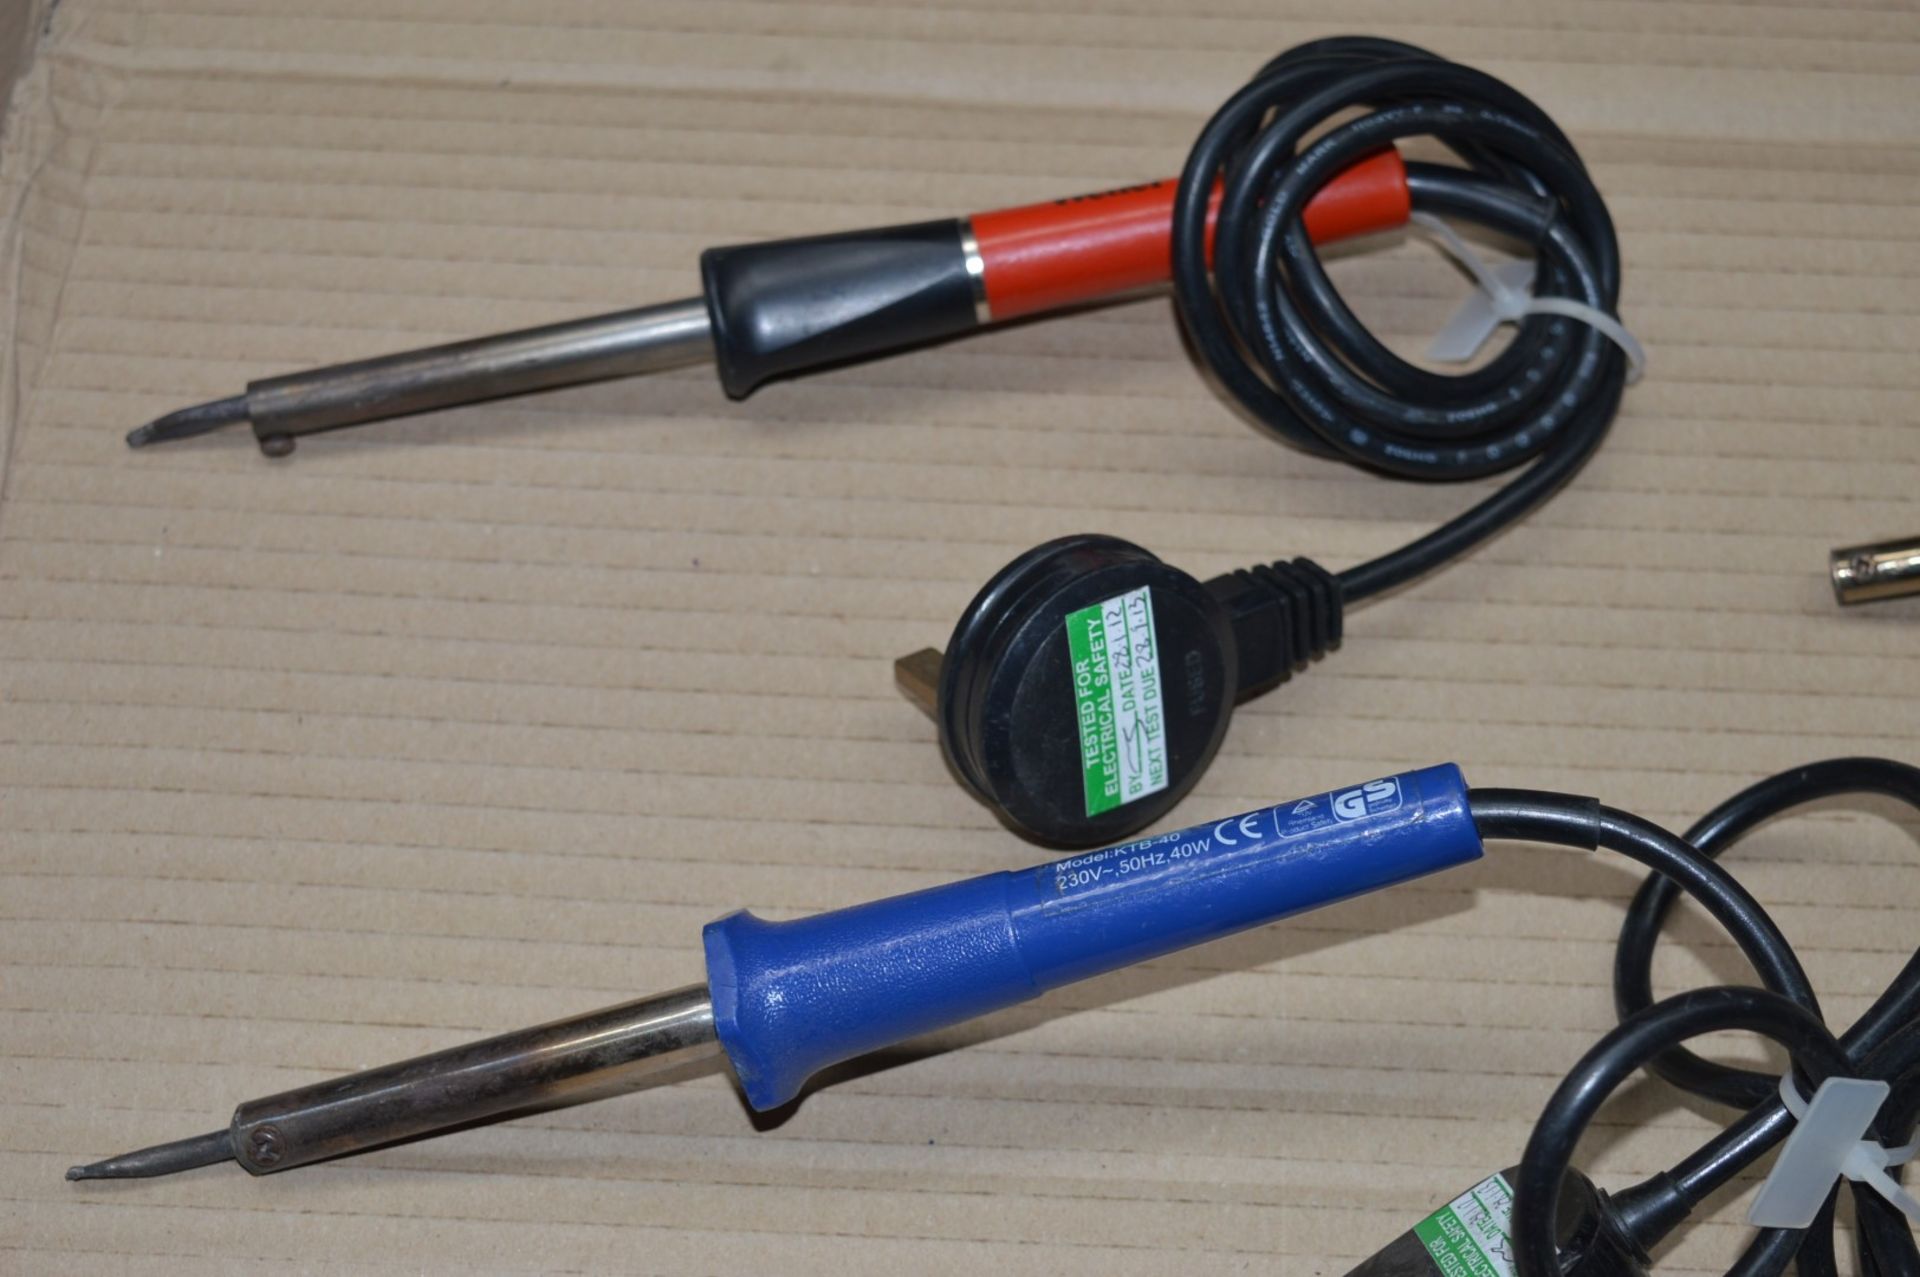 6 x Various 240v Soldering Irons - Brands Include Weller and Draper - CL300 - Ref JP105 - - Image 21 of 22